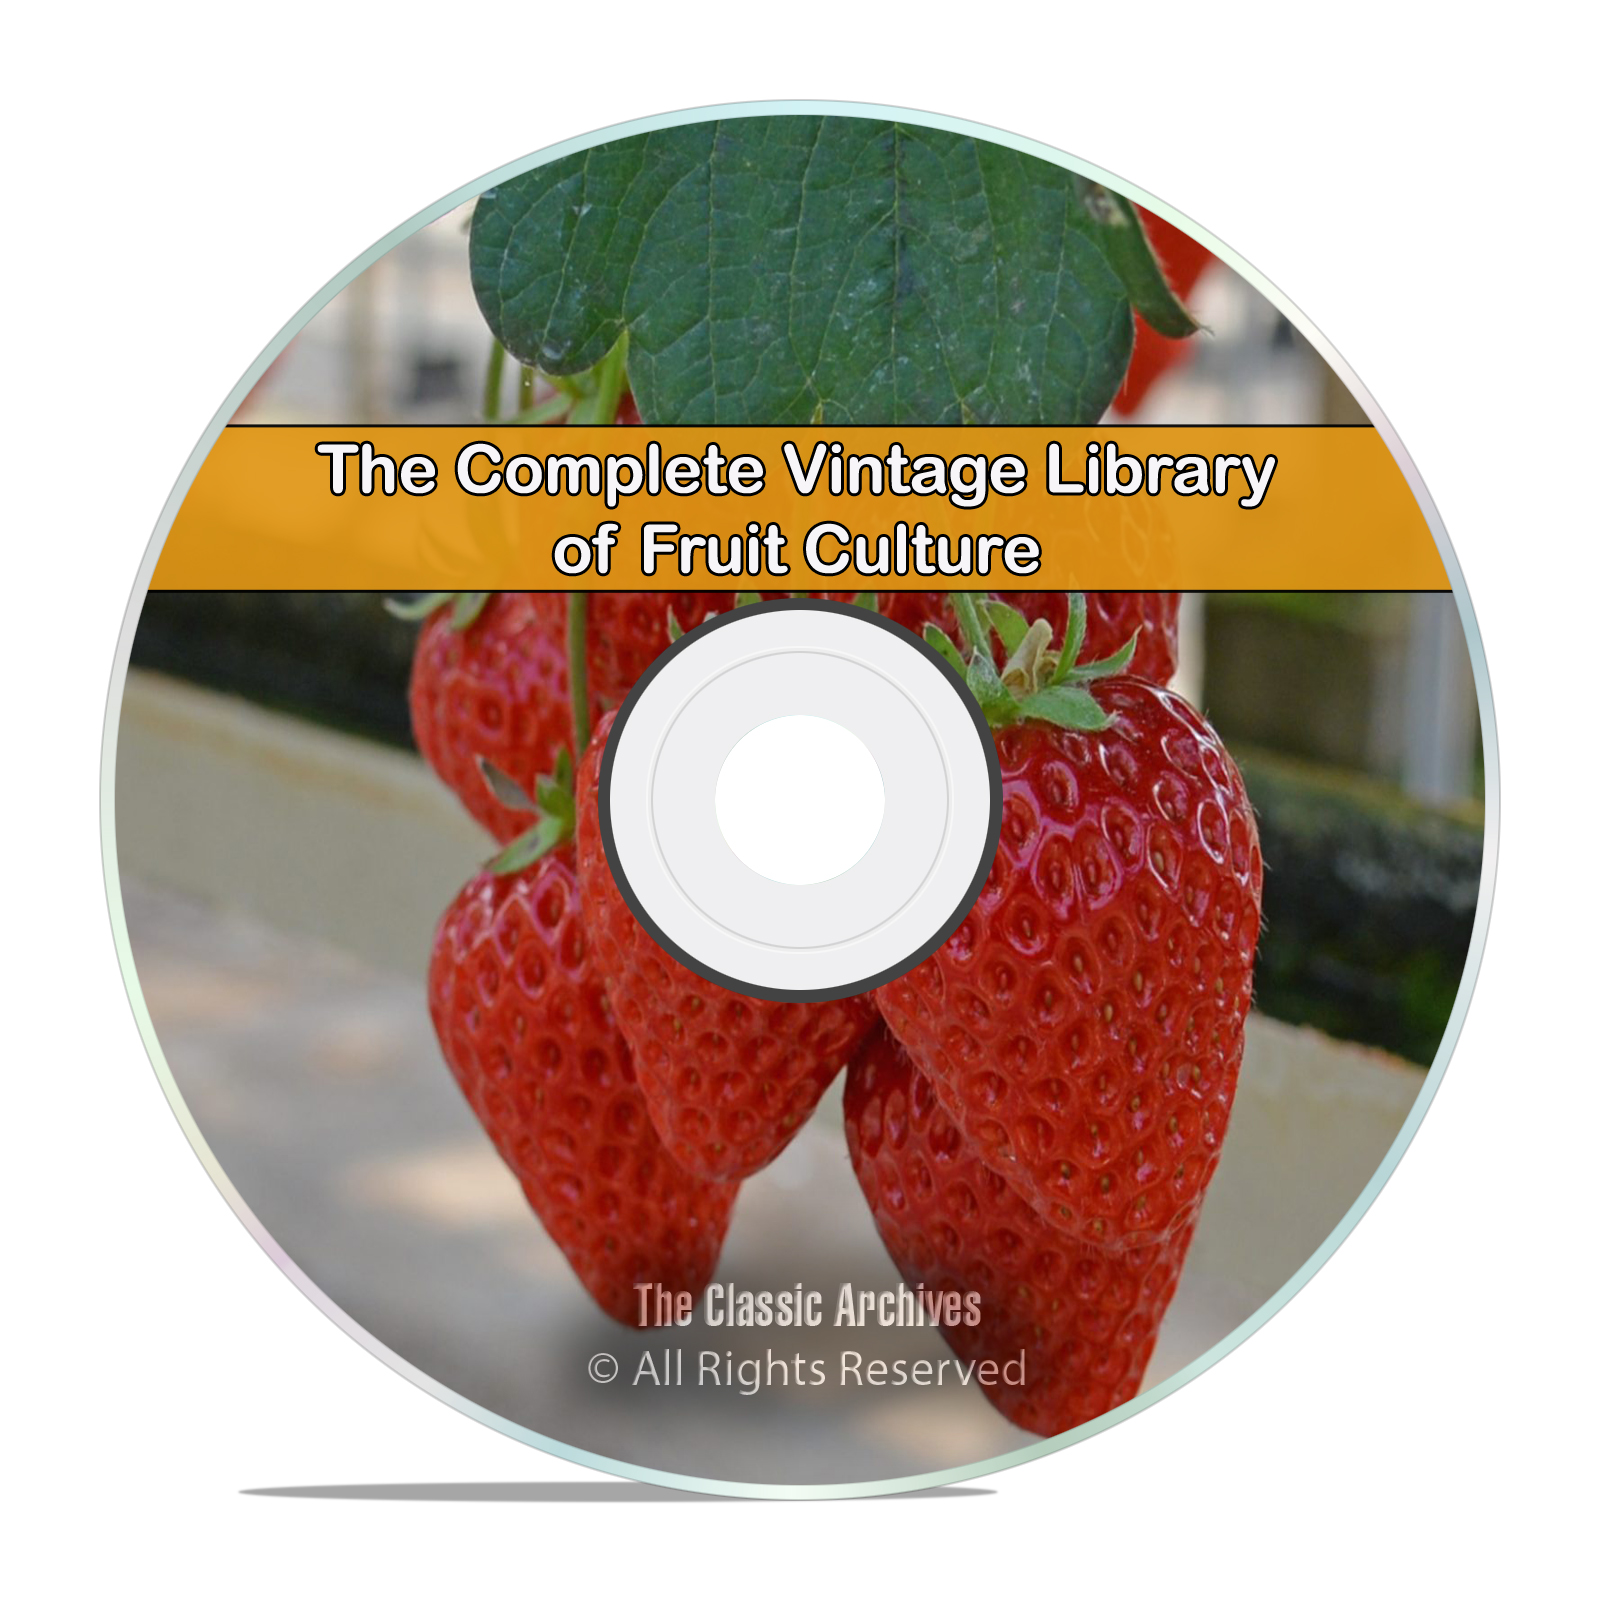 Library of Fruit Culture, 157 Books, Grow, How to, Recipes Garden PDF DVD